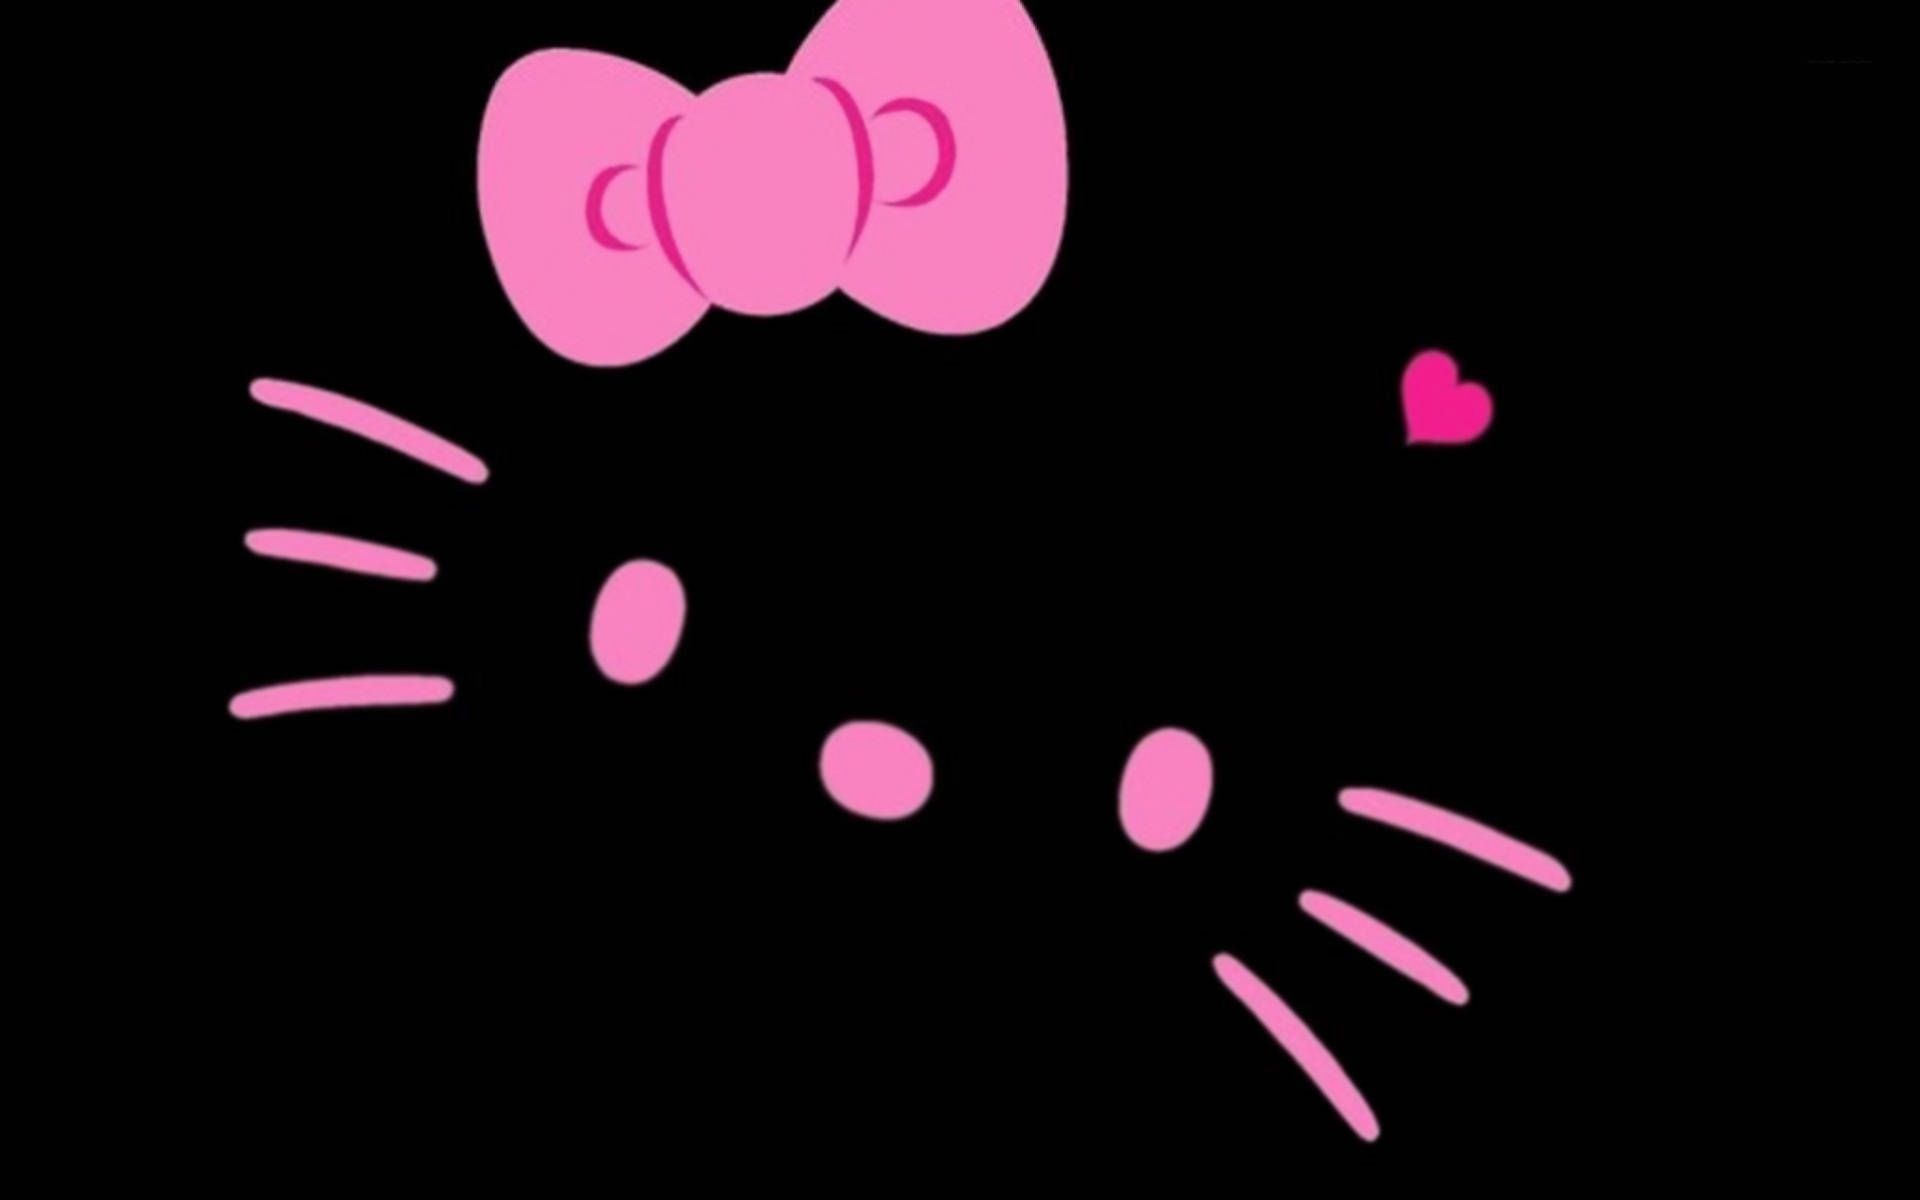 Hello Kitty is a character created by the Japanese company Sanrio. - Hello Kitty